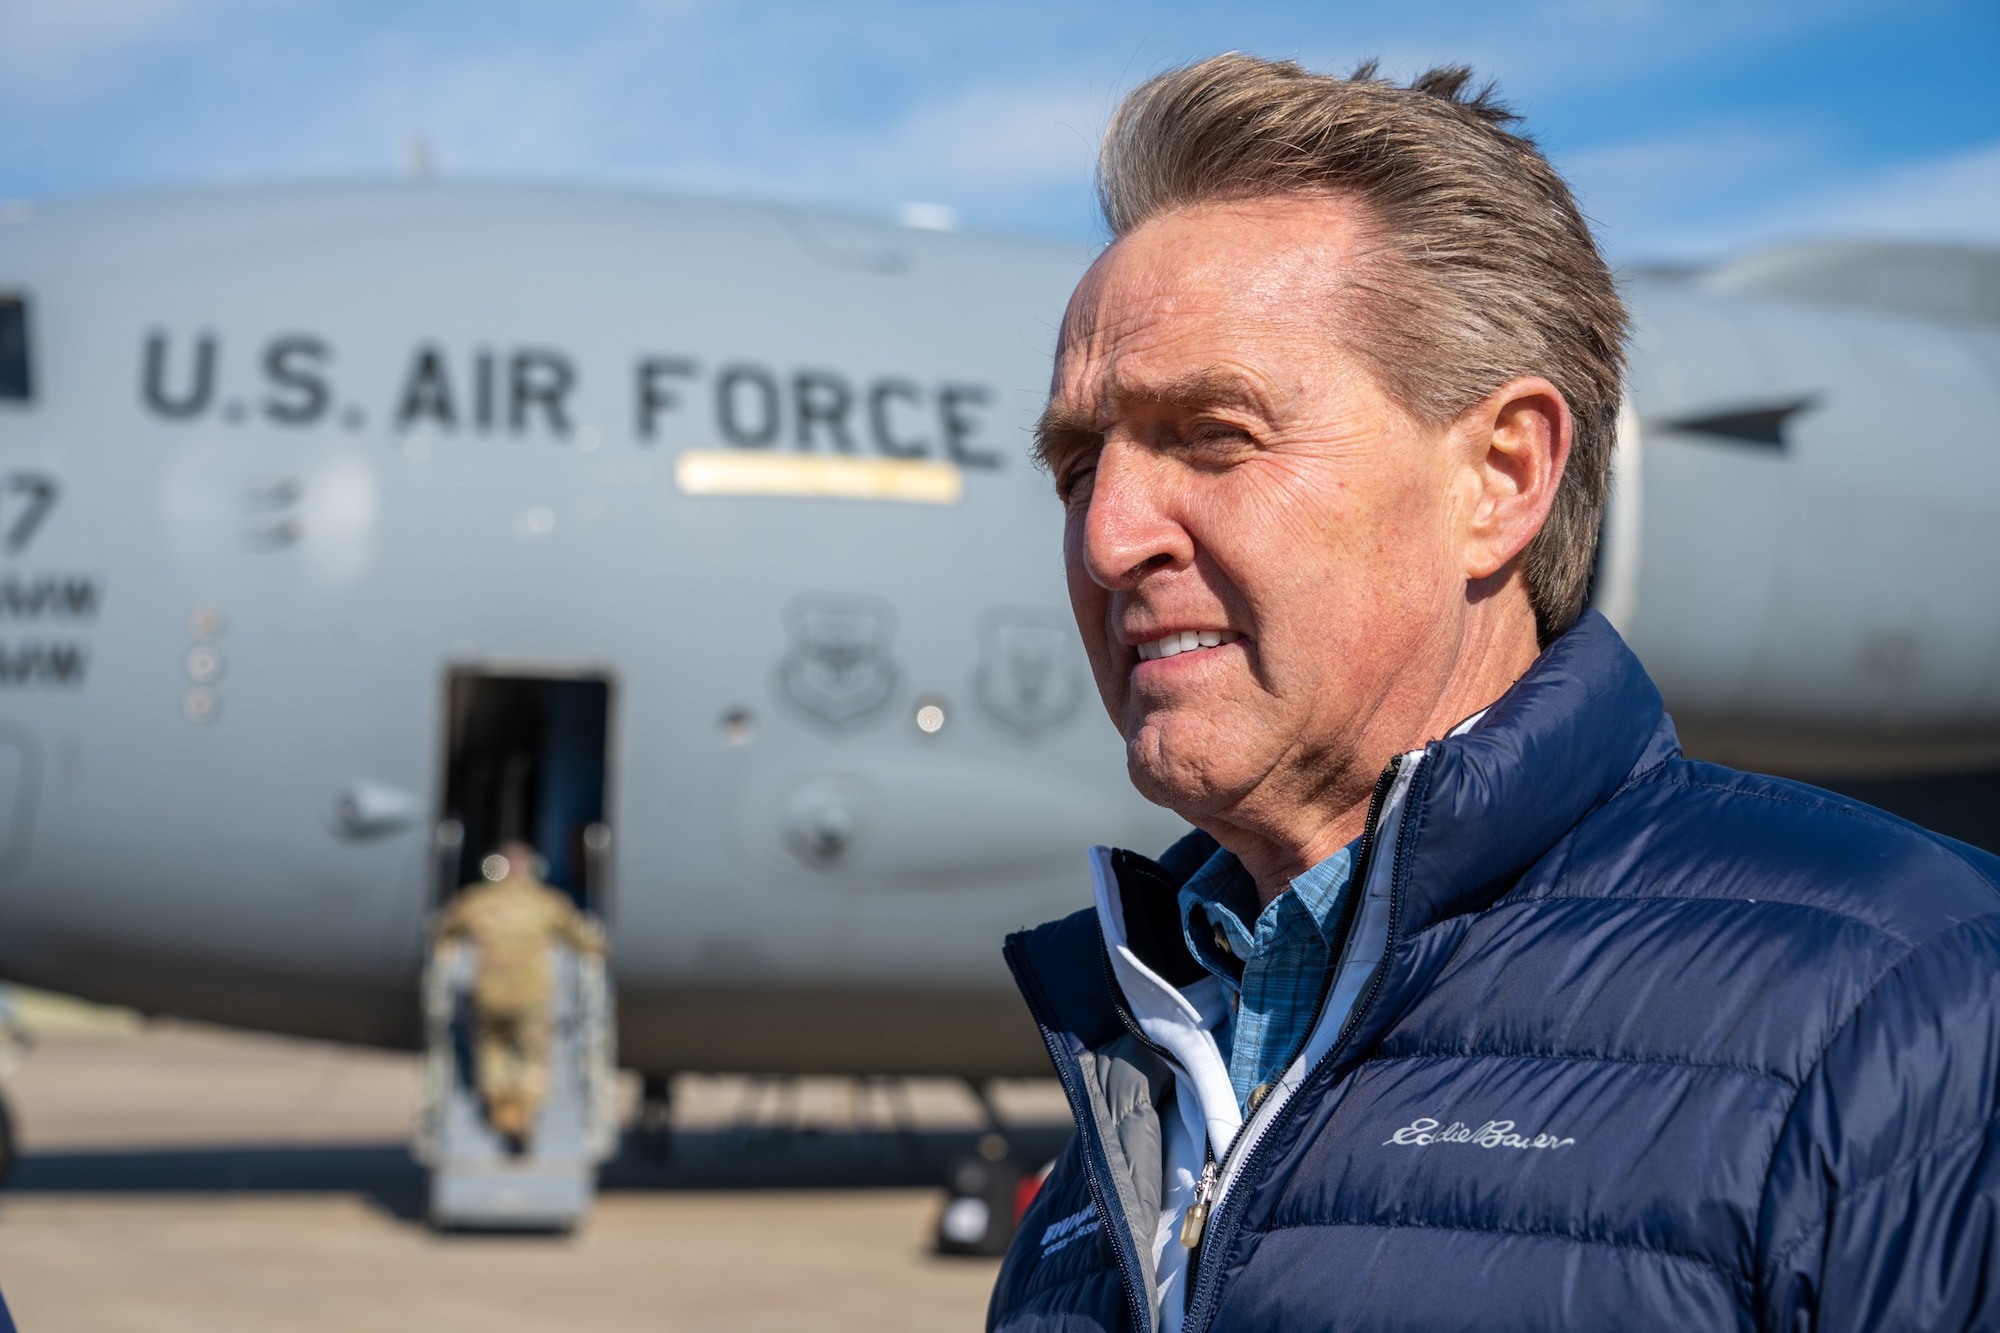 U.S. Ambassador Jeffry Flake, U.S. Ambassador to Türkiye, stands outside of a C-17 Globemaster III aircraft that carried members of the United States Agency for International Development’s Disaster Assistance Response Team to Incirlik Air Base, Türkiye, Feb 8, 2023. Ambassador Flake visited Incirlik AB to greet members of the USAID team, following a series of earthquakes that struck central-southern Türkiye on Feb 6, 2023. As Ambassador to Türkiye, Flake holds the highest civilian position as The Chief of Mission, and impacts the communication and resources of U.S. personnel, advancing the U.S. foreign policy goals. As a fellow NATO ally, the U.S. Government mobilized personnel to assist in Türkiye in their response efforts. (U.S. Air Force photo by Senior Airman David D. McLoney)